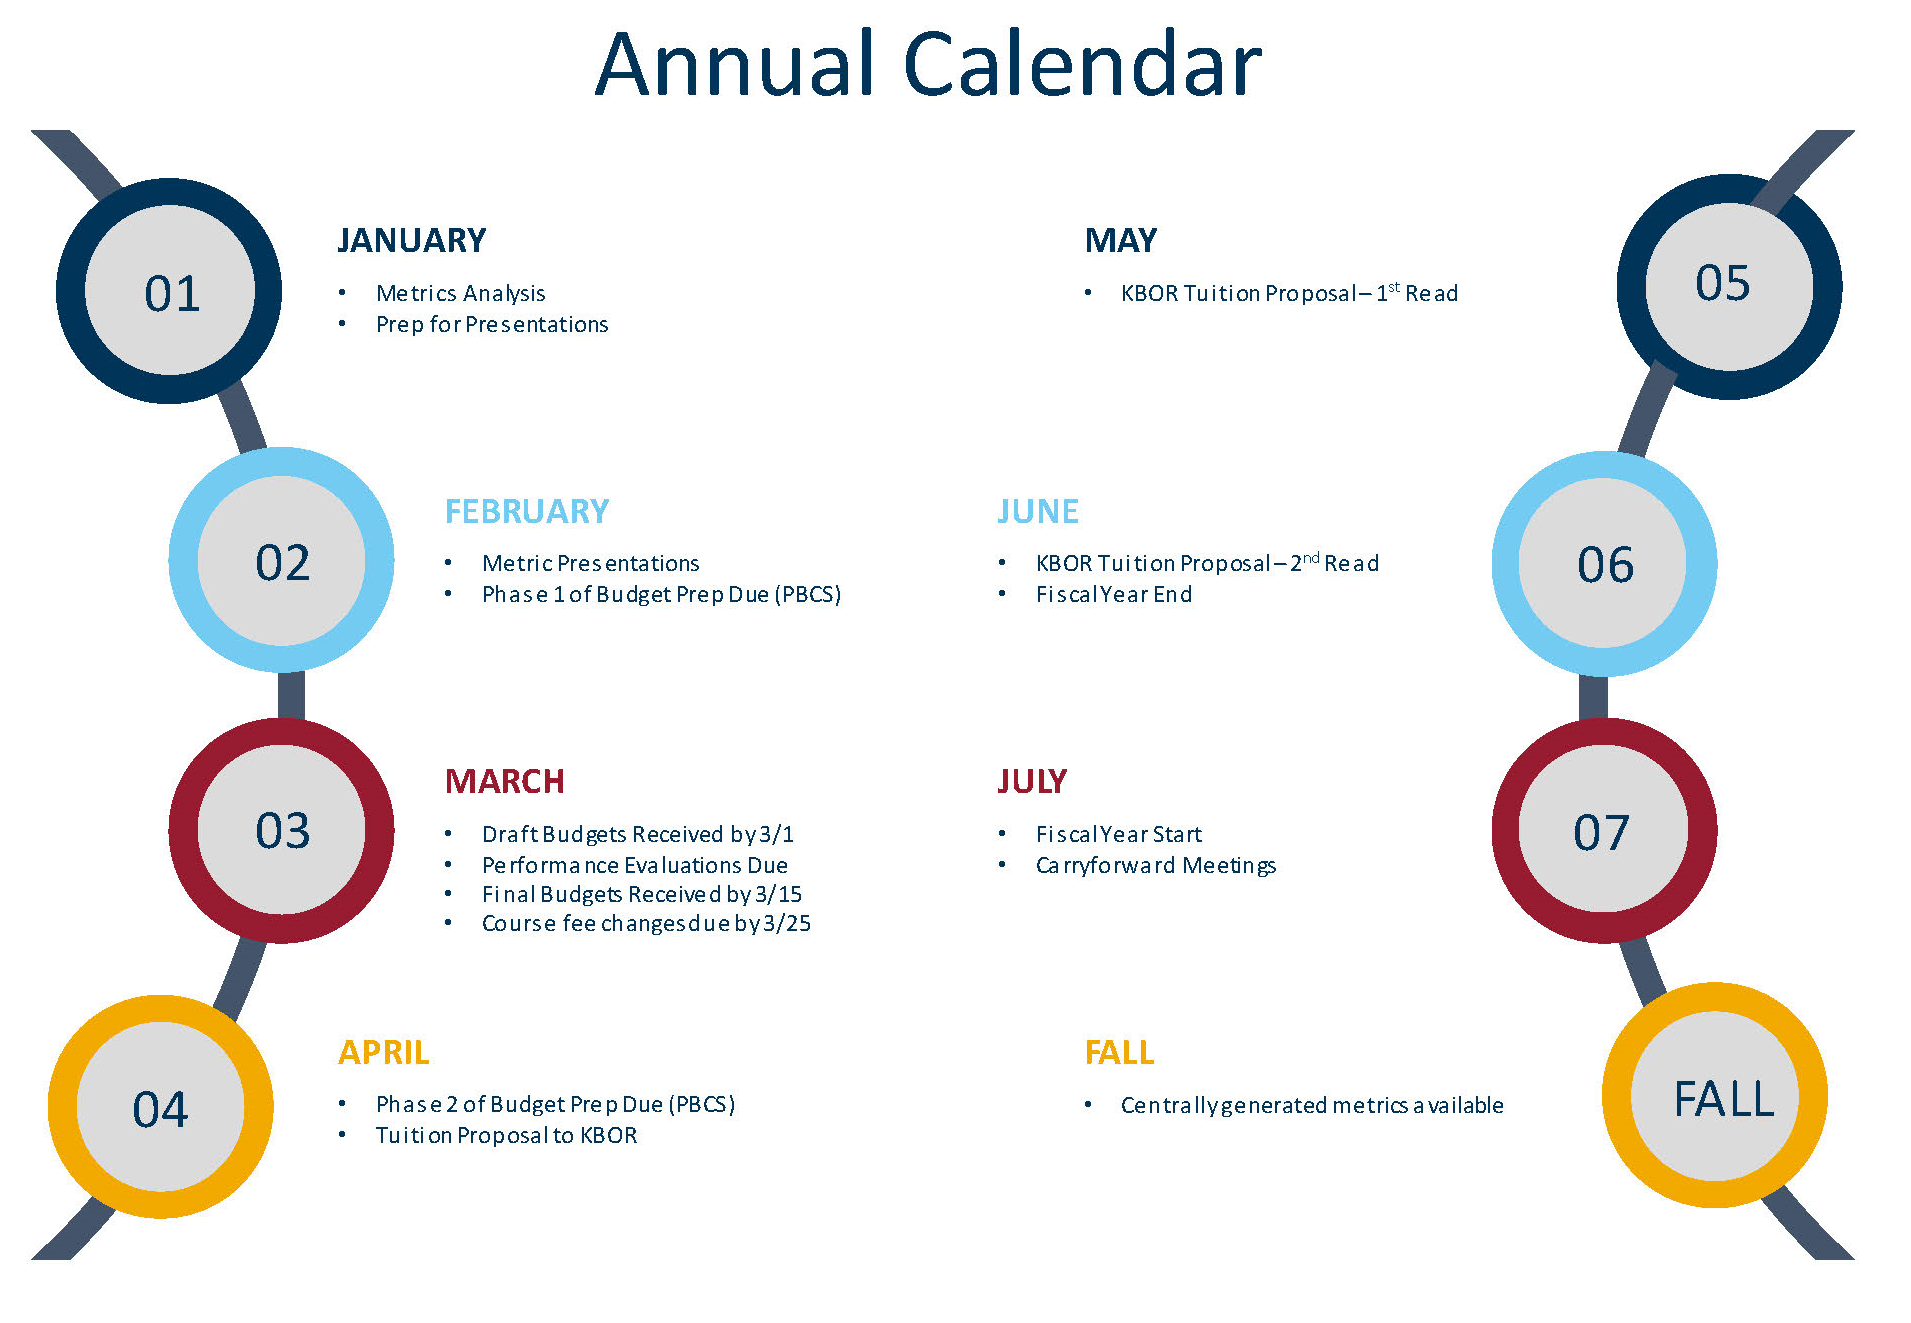 Content of image is explained in "Annual Calendar" text below.